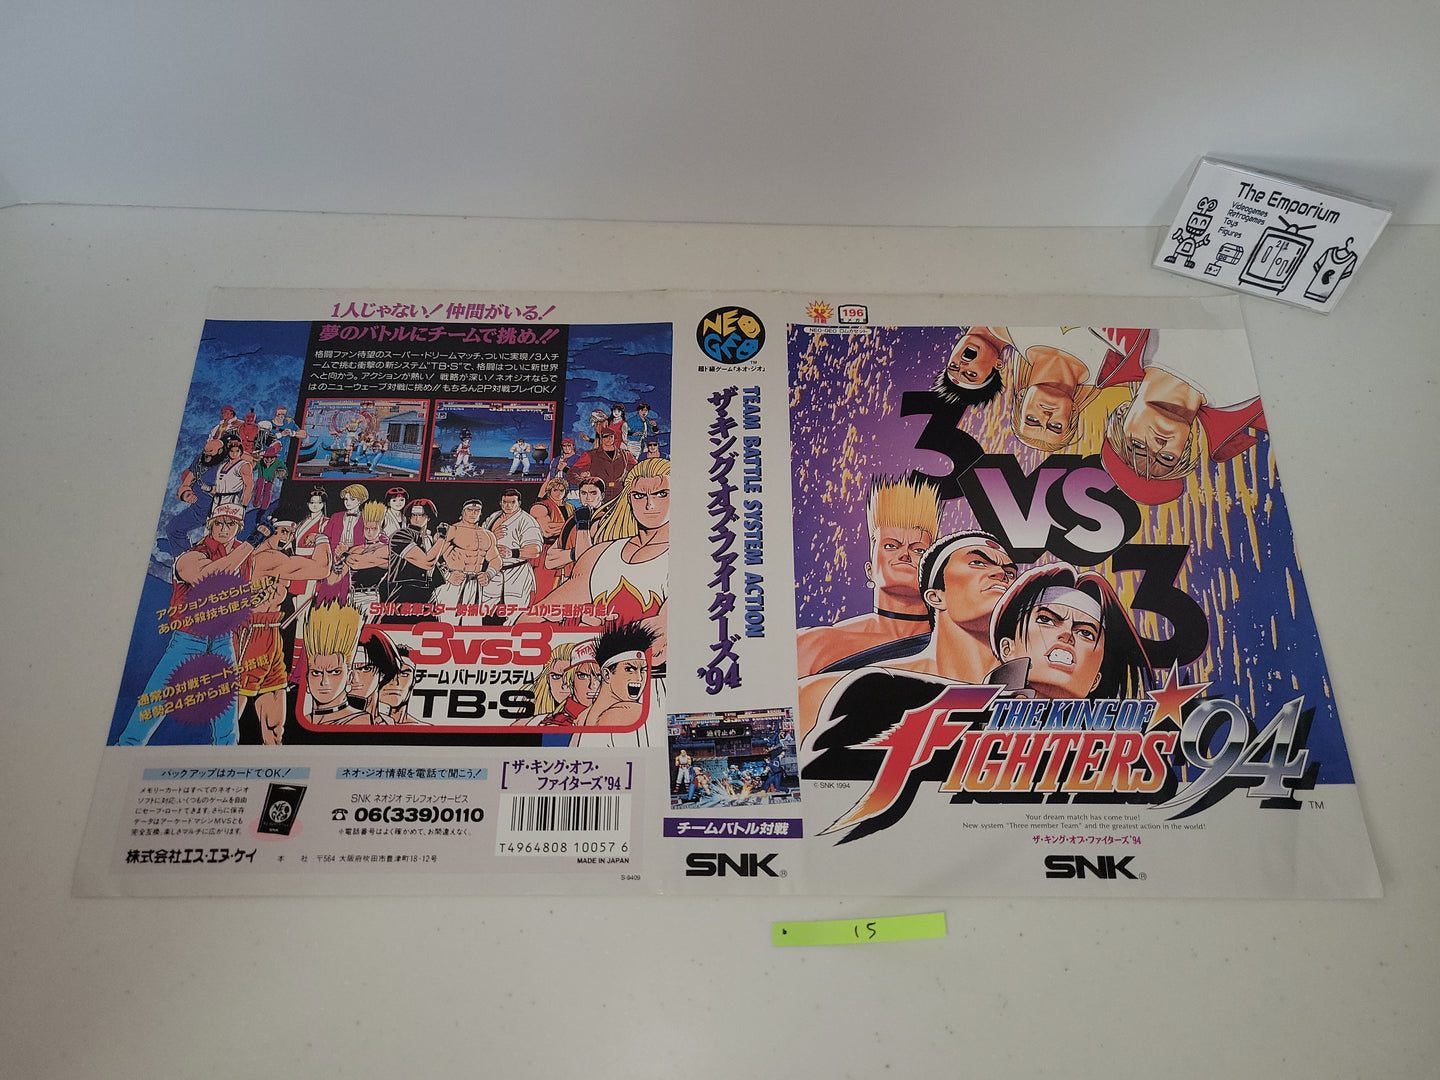 The King of Fighters 94 Insert - Snk Neogeo AES NG